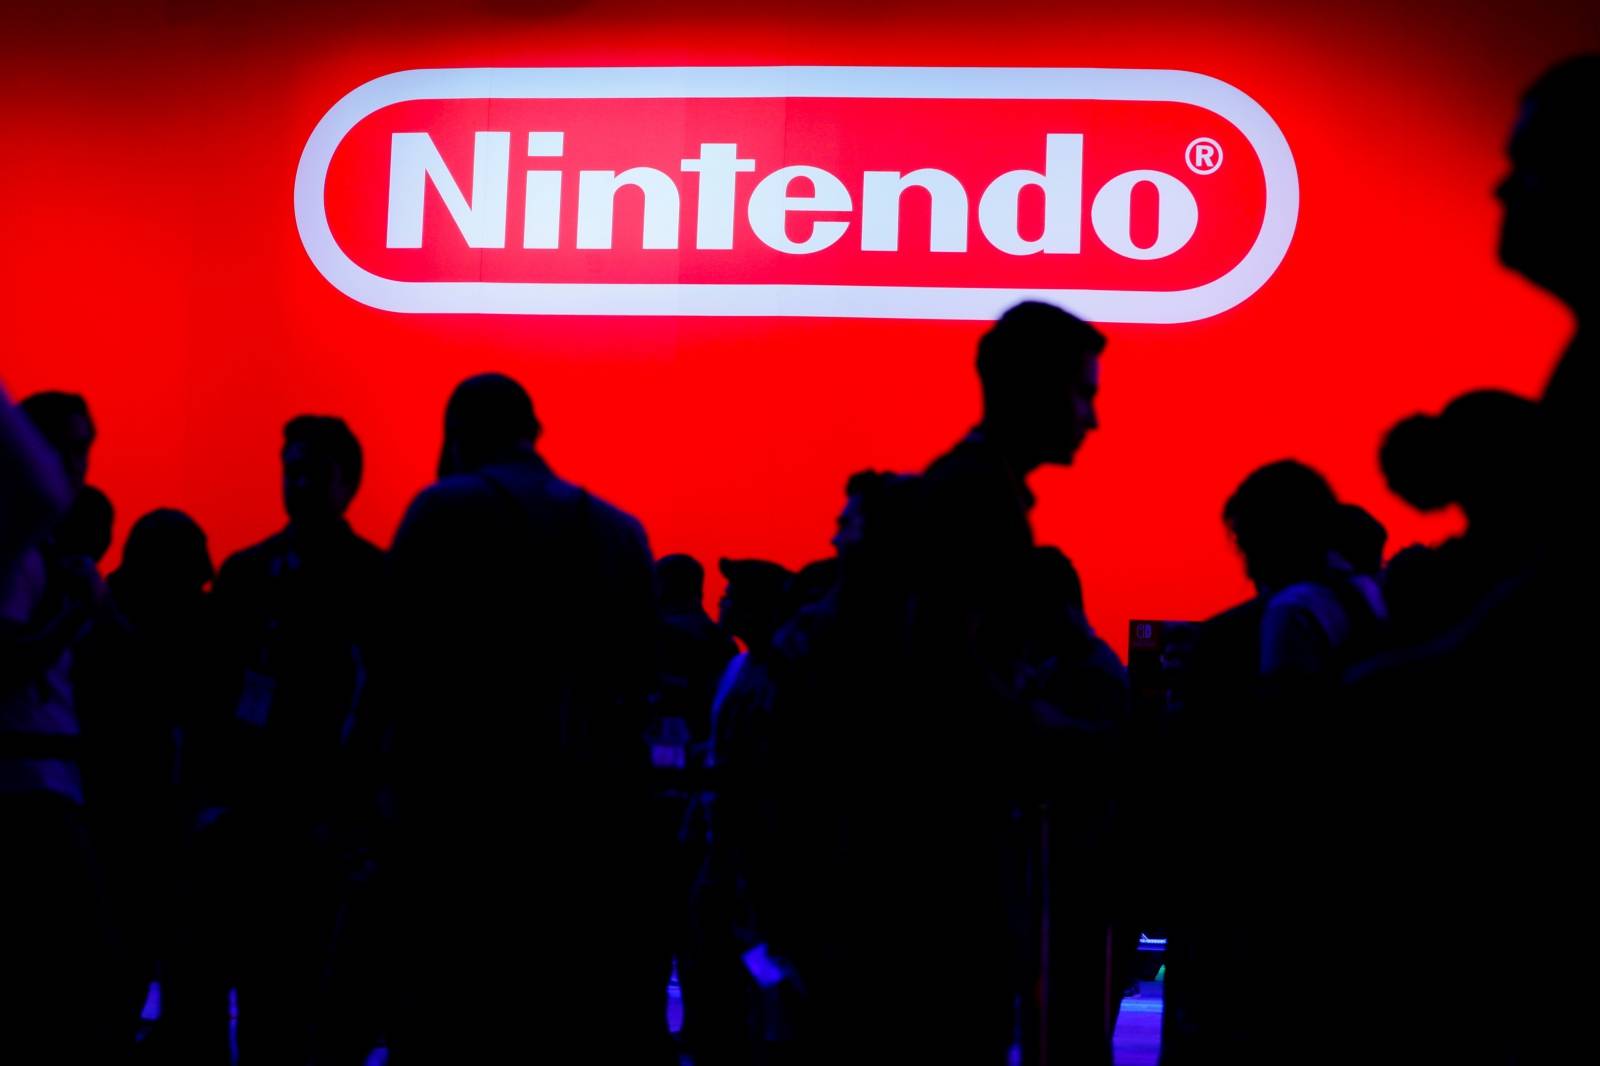 FILE PHOTO: A display for the gaming company Nintendo is shown during opening day of E3 in Los Angeles